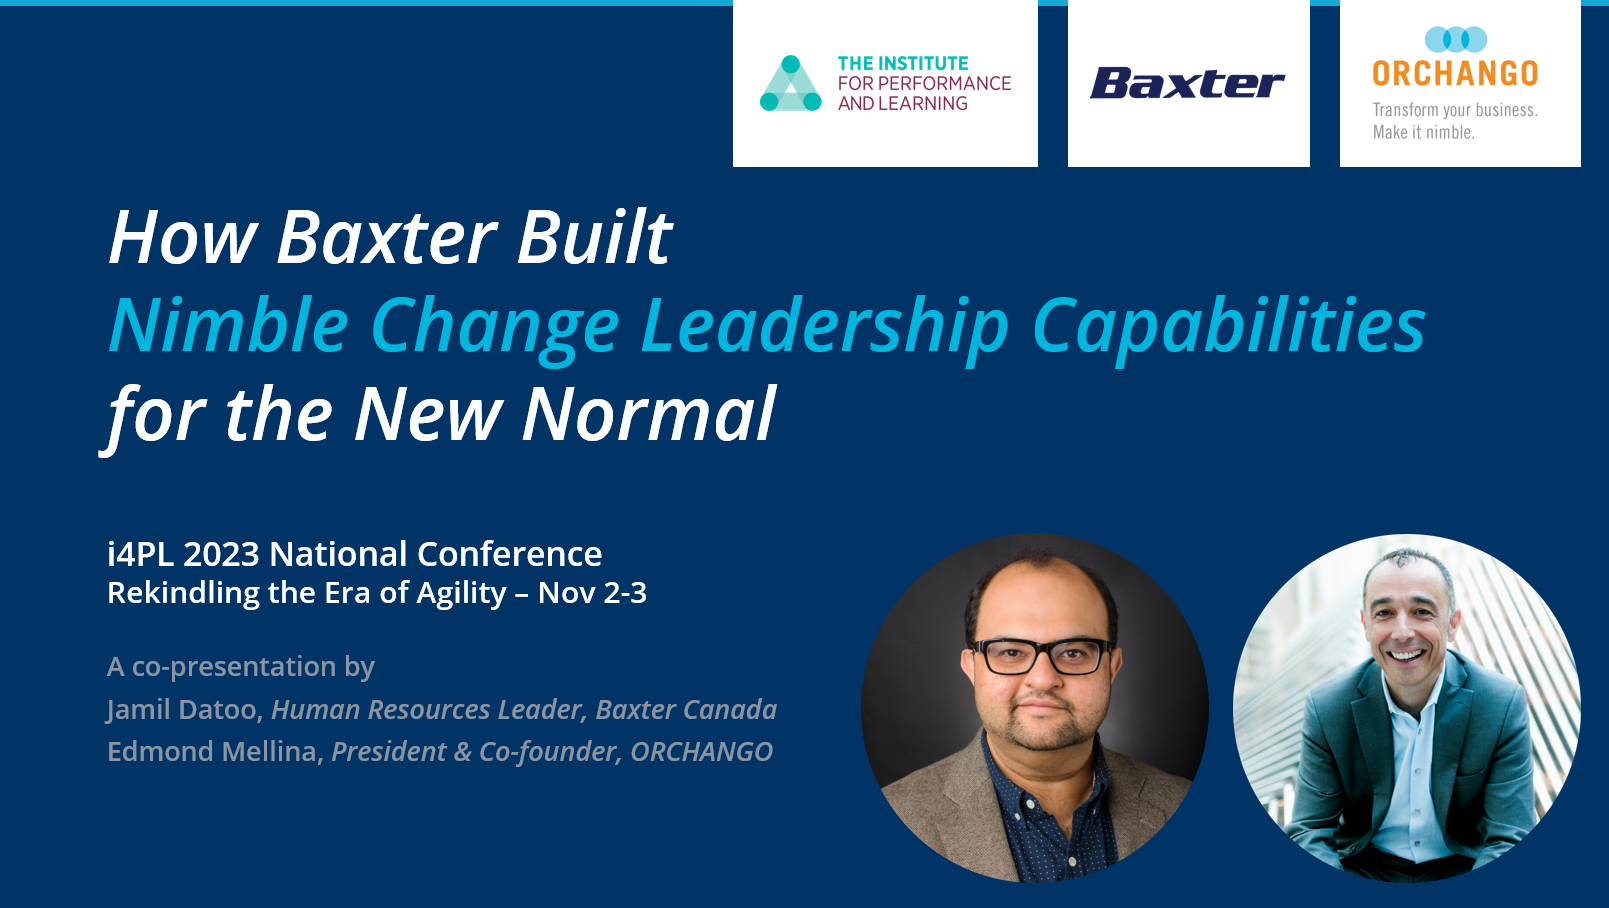 Co-presentation with Baxter Canada at i4PL by Edmond Mellina and Jamil Datoo